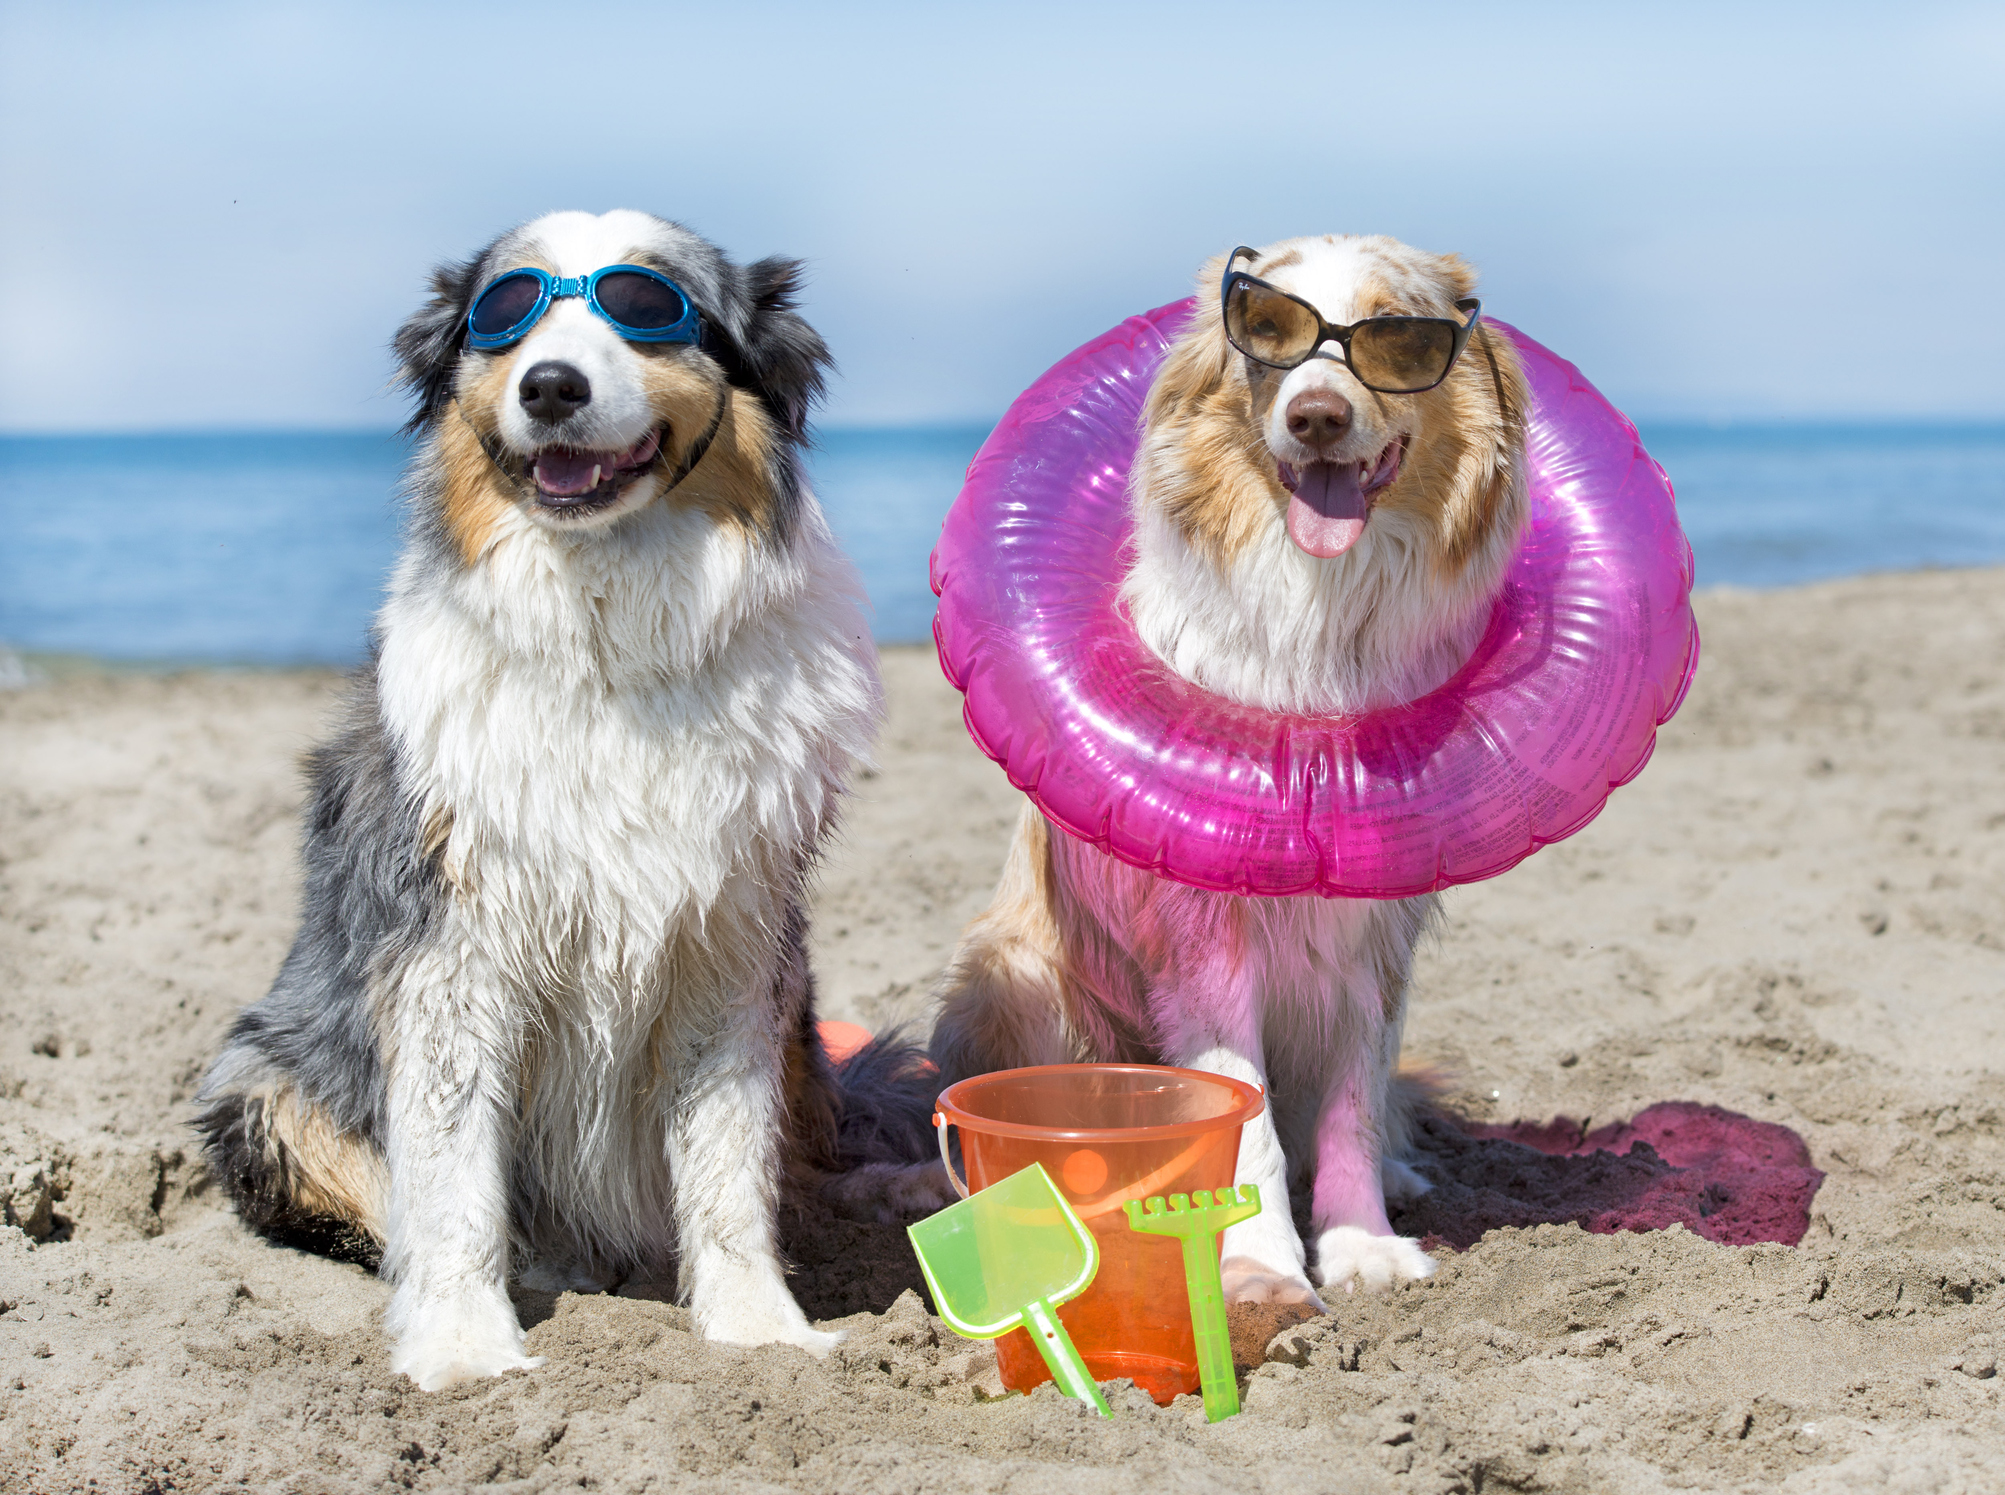 Enjoy "The Dog Days Of Summer" With Us!